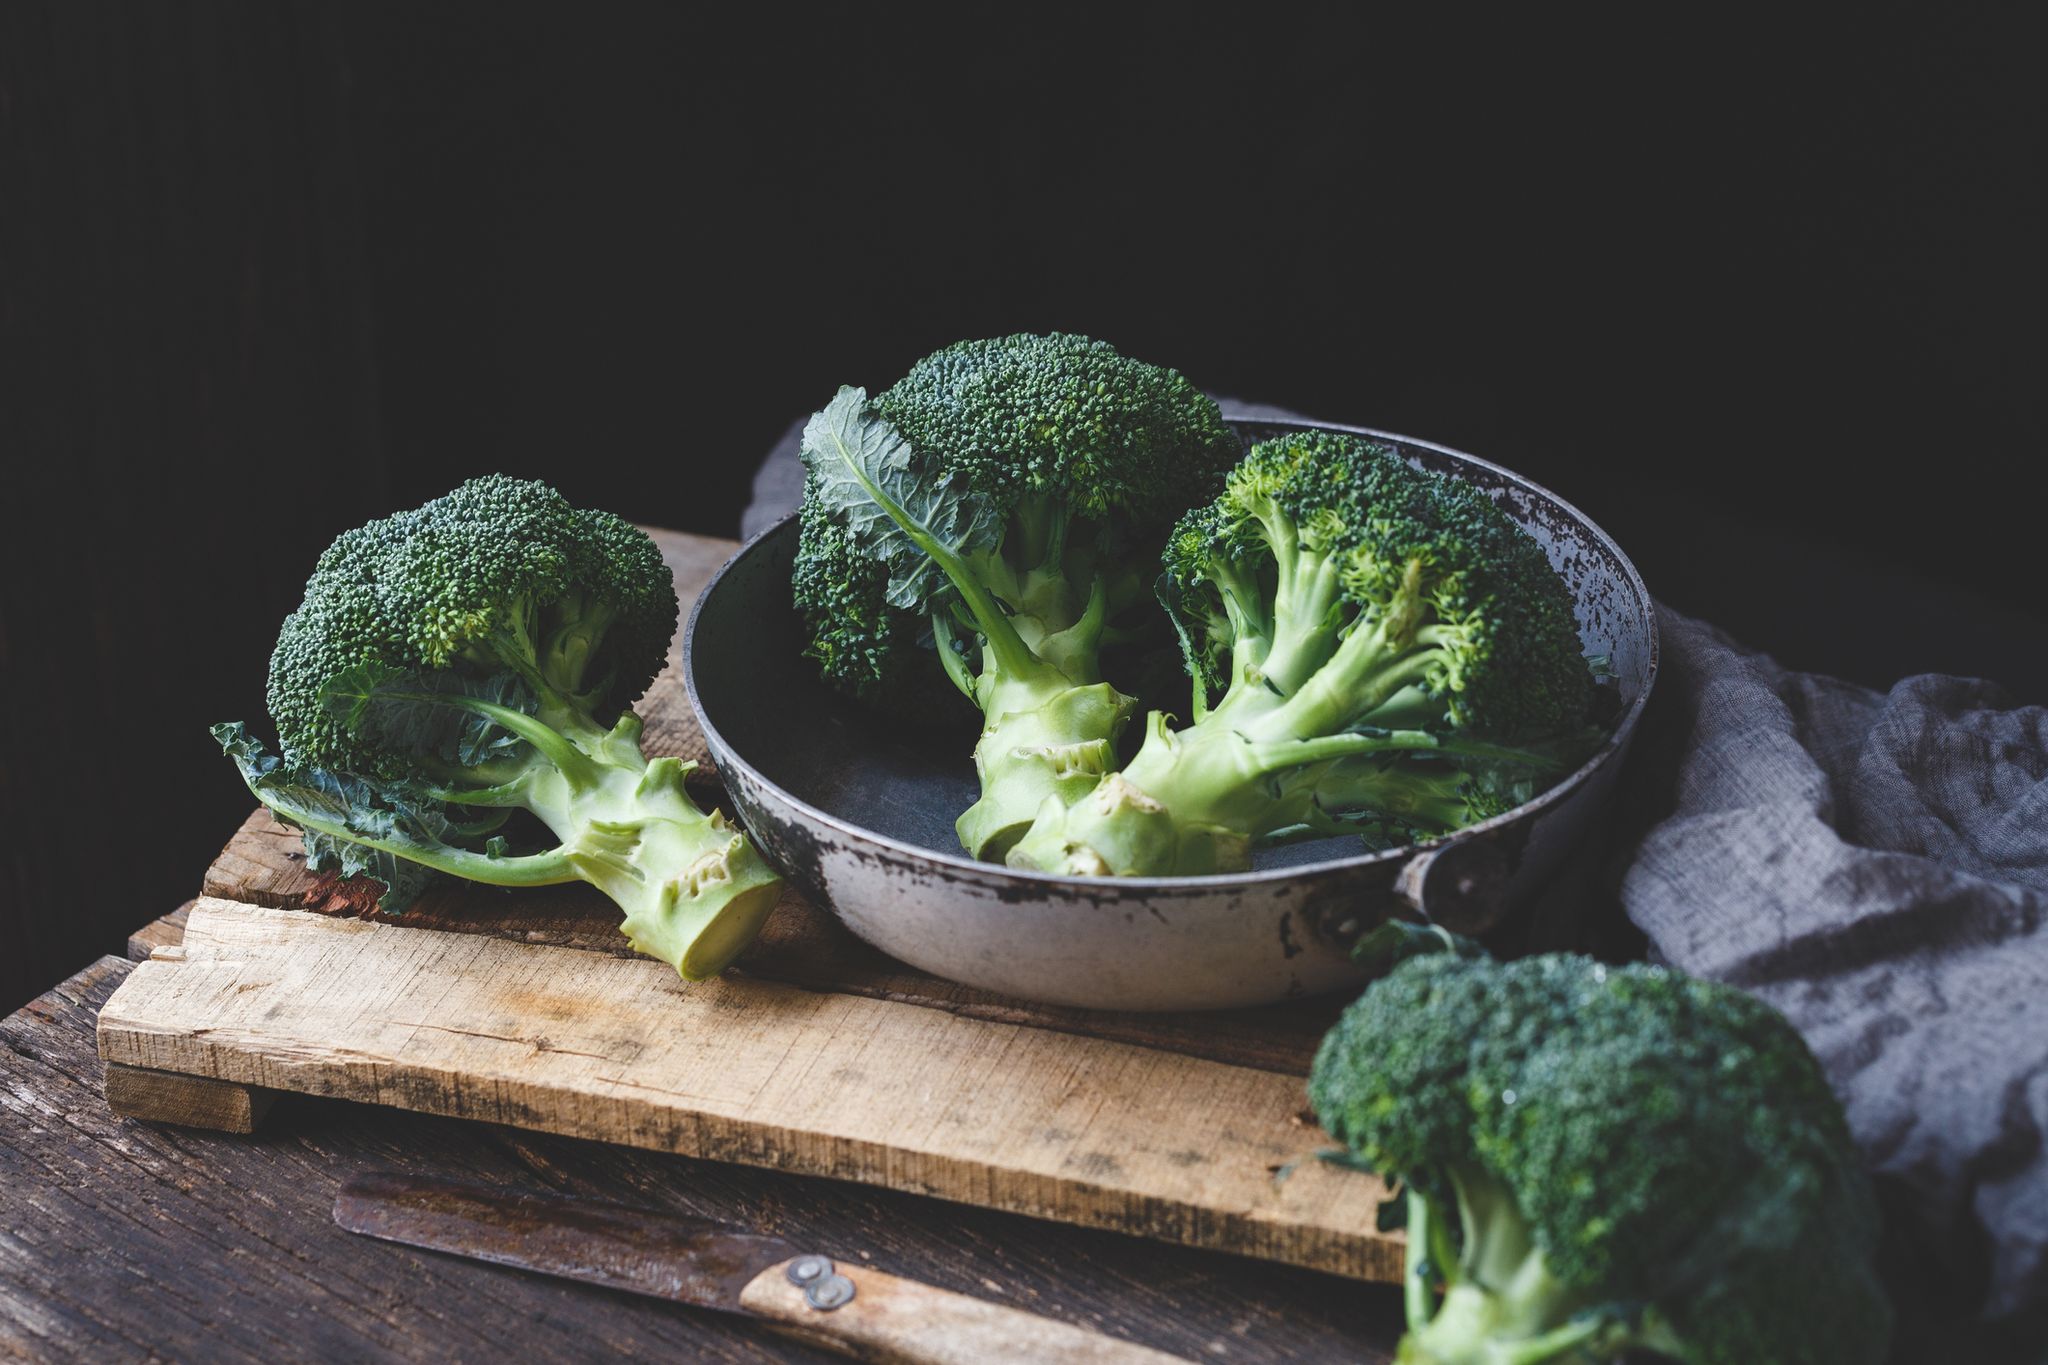 Close-Up Of Broccolis On Wooden Table Against Black Background